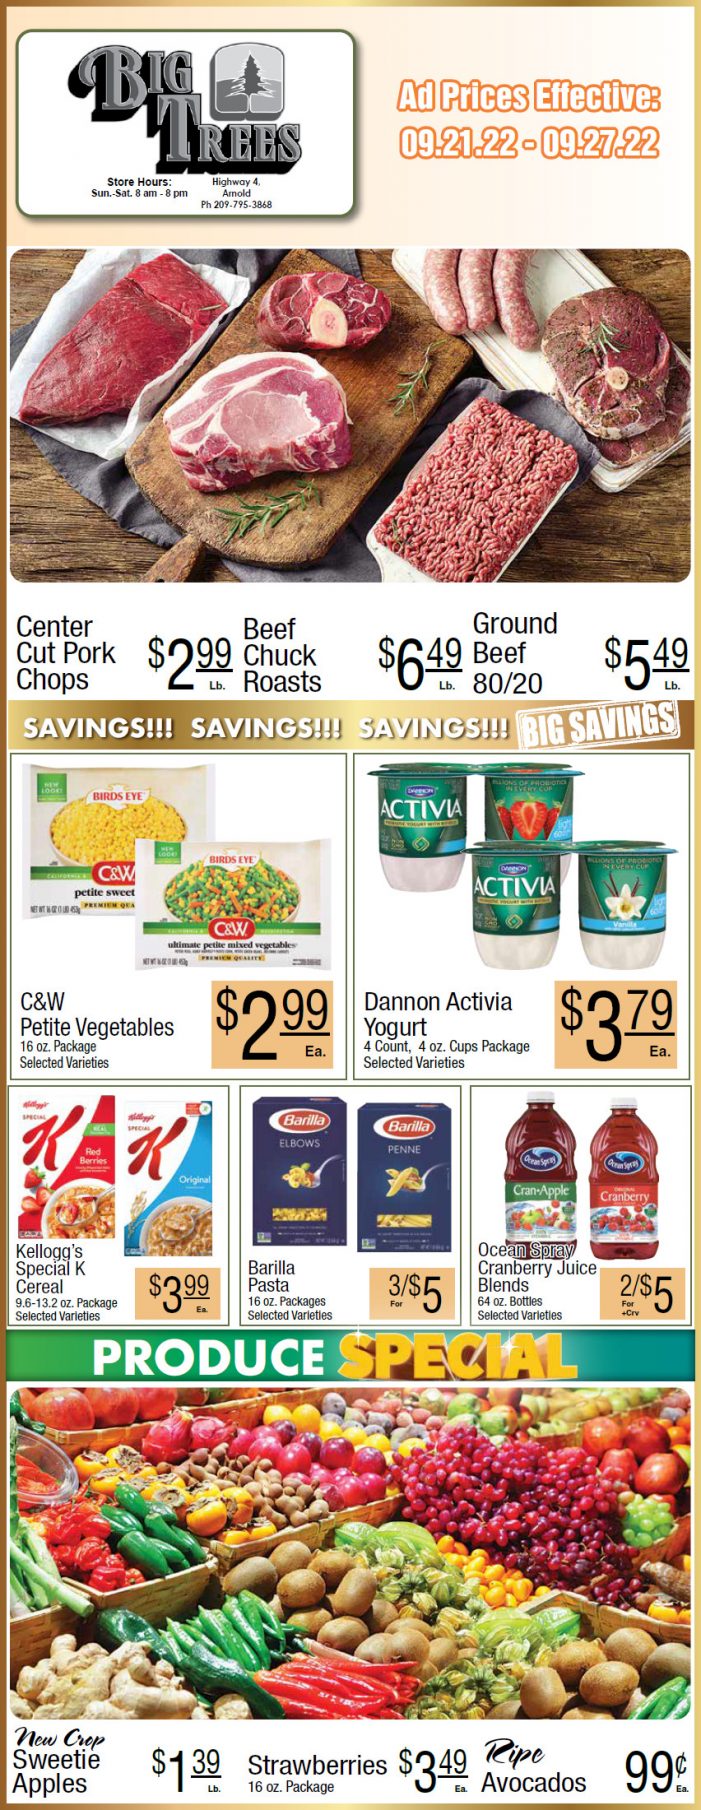 Big Trees Market Weekly Ad & Grocery Specials Sept 21 – 27!  Shop Local & Save!!